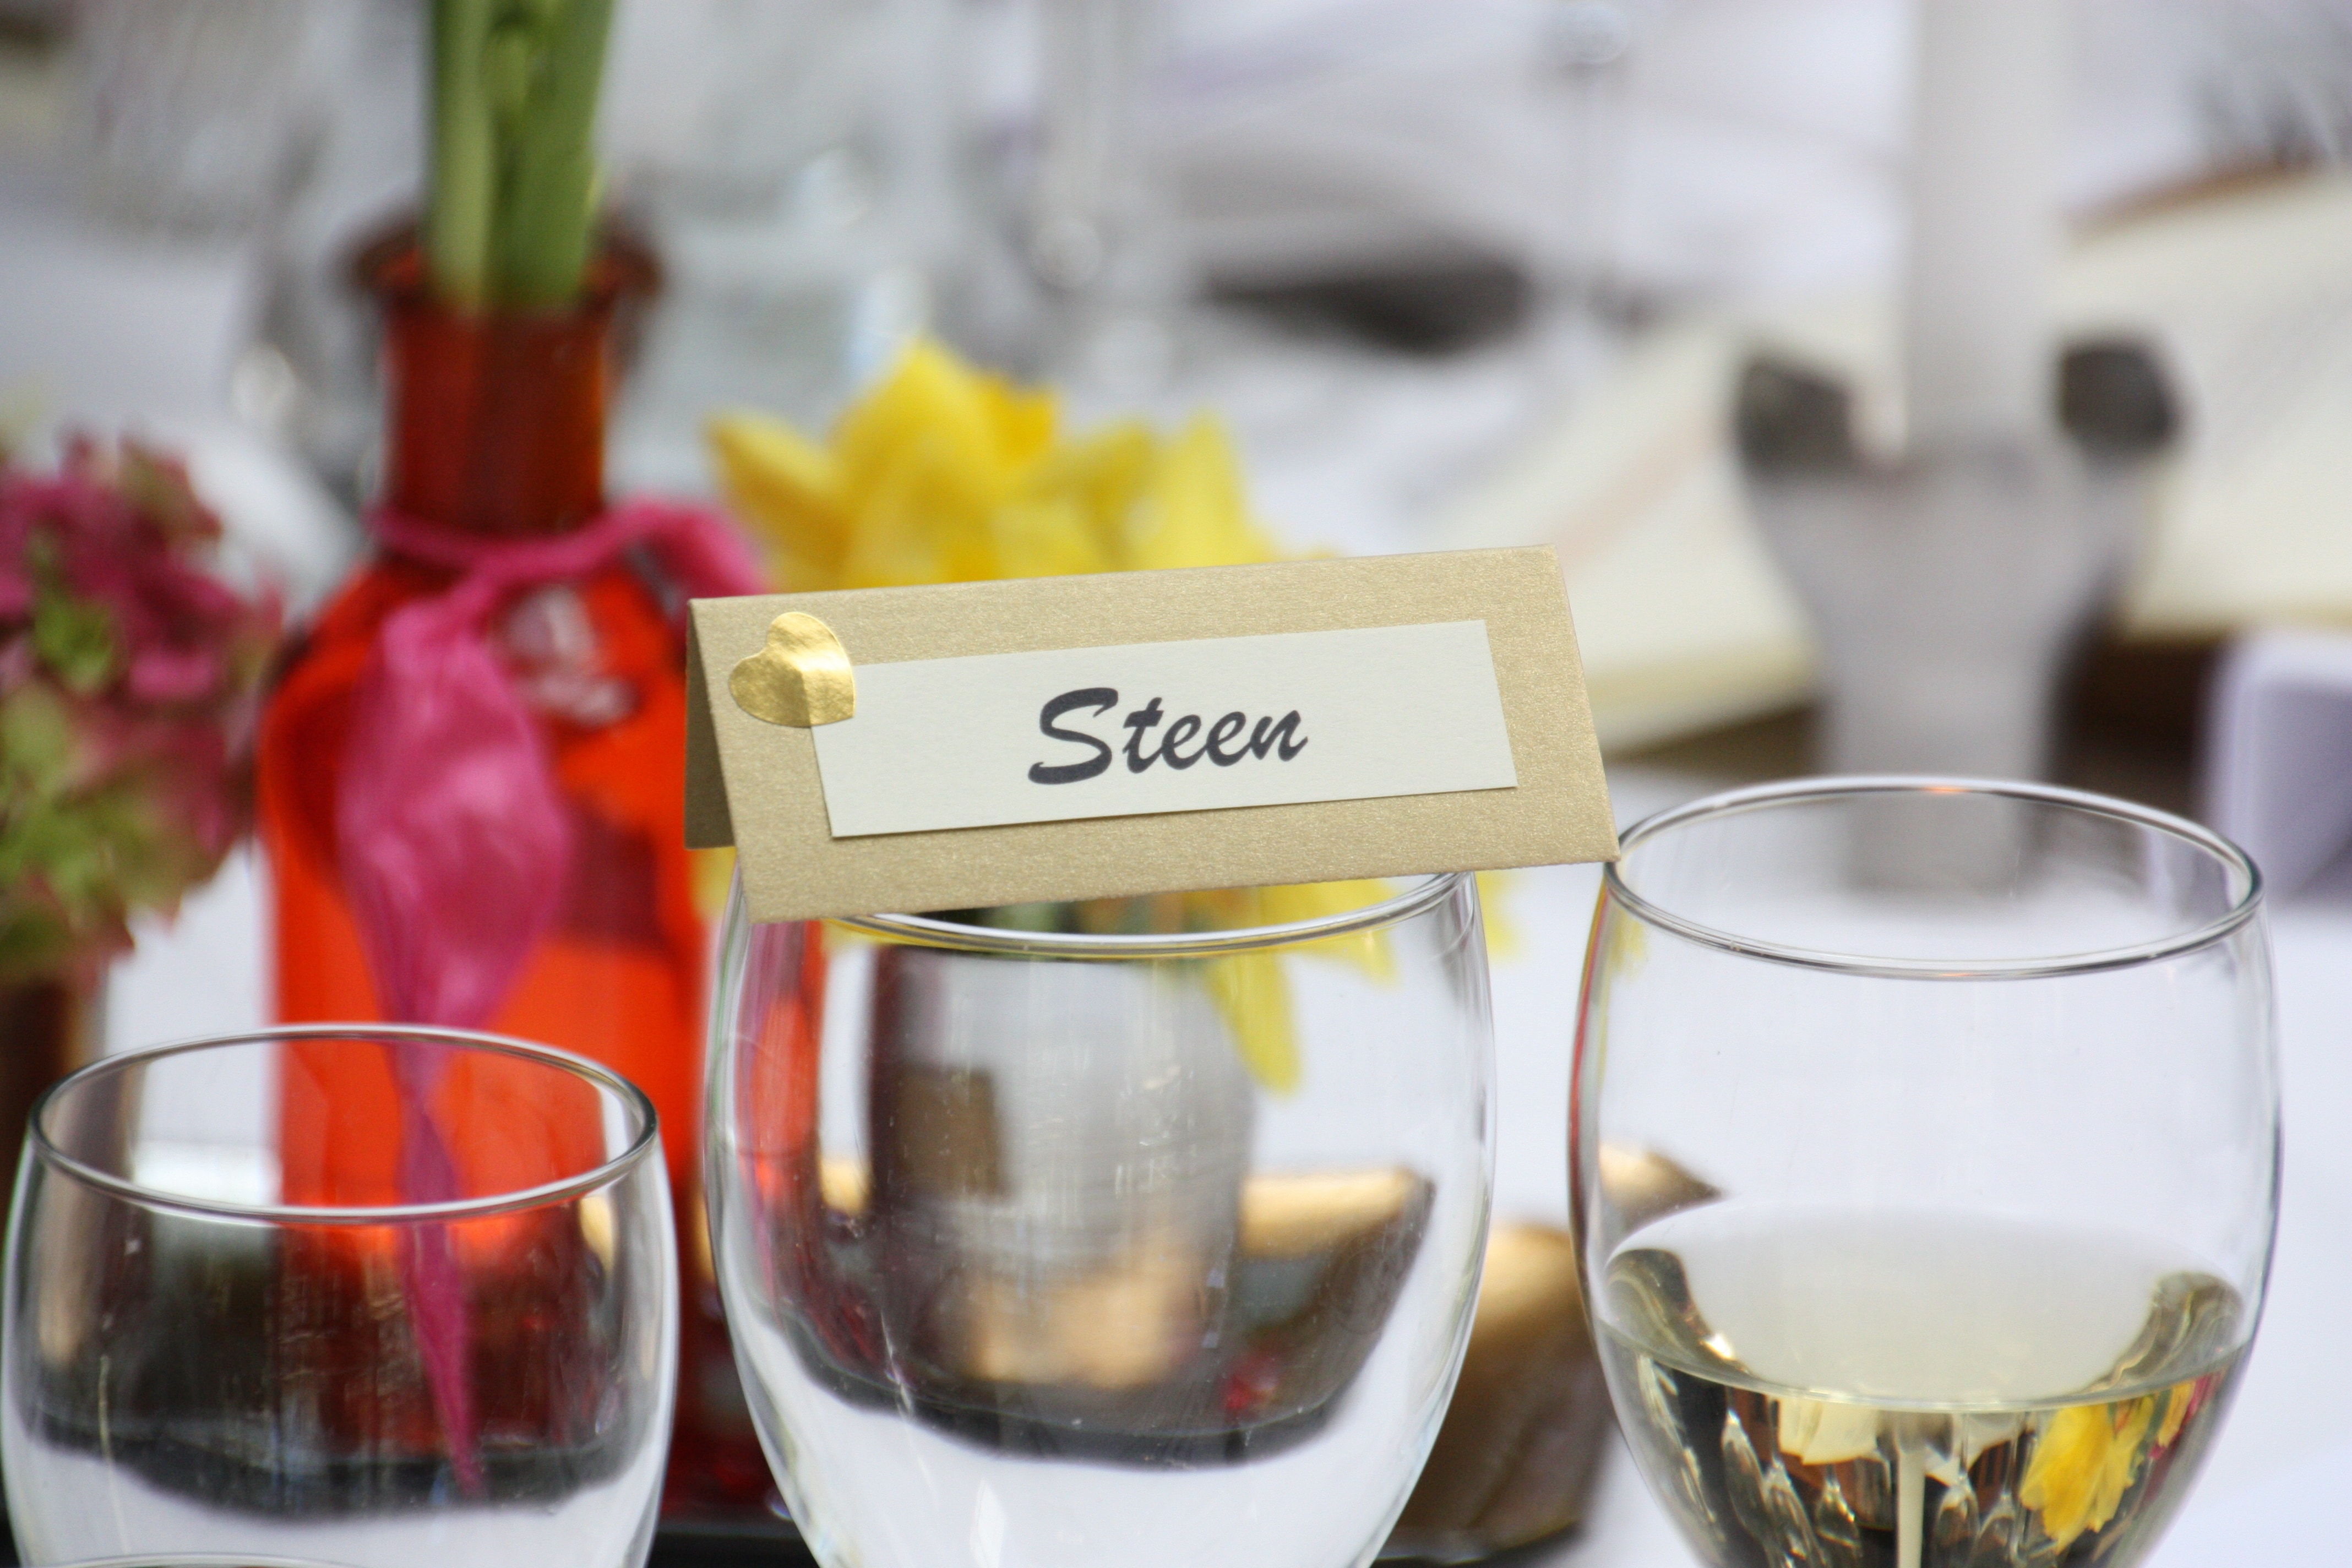 Steen labeled 3 glass cups